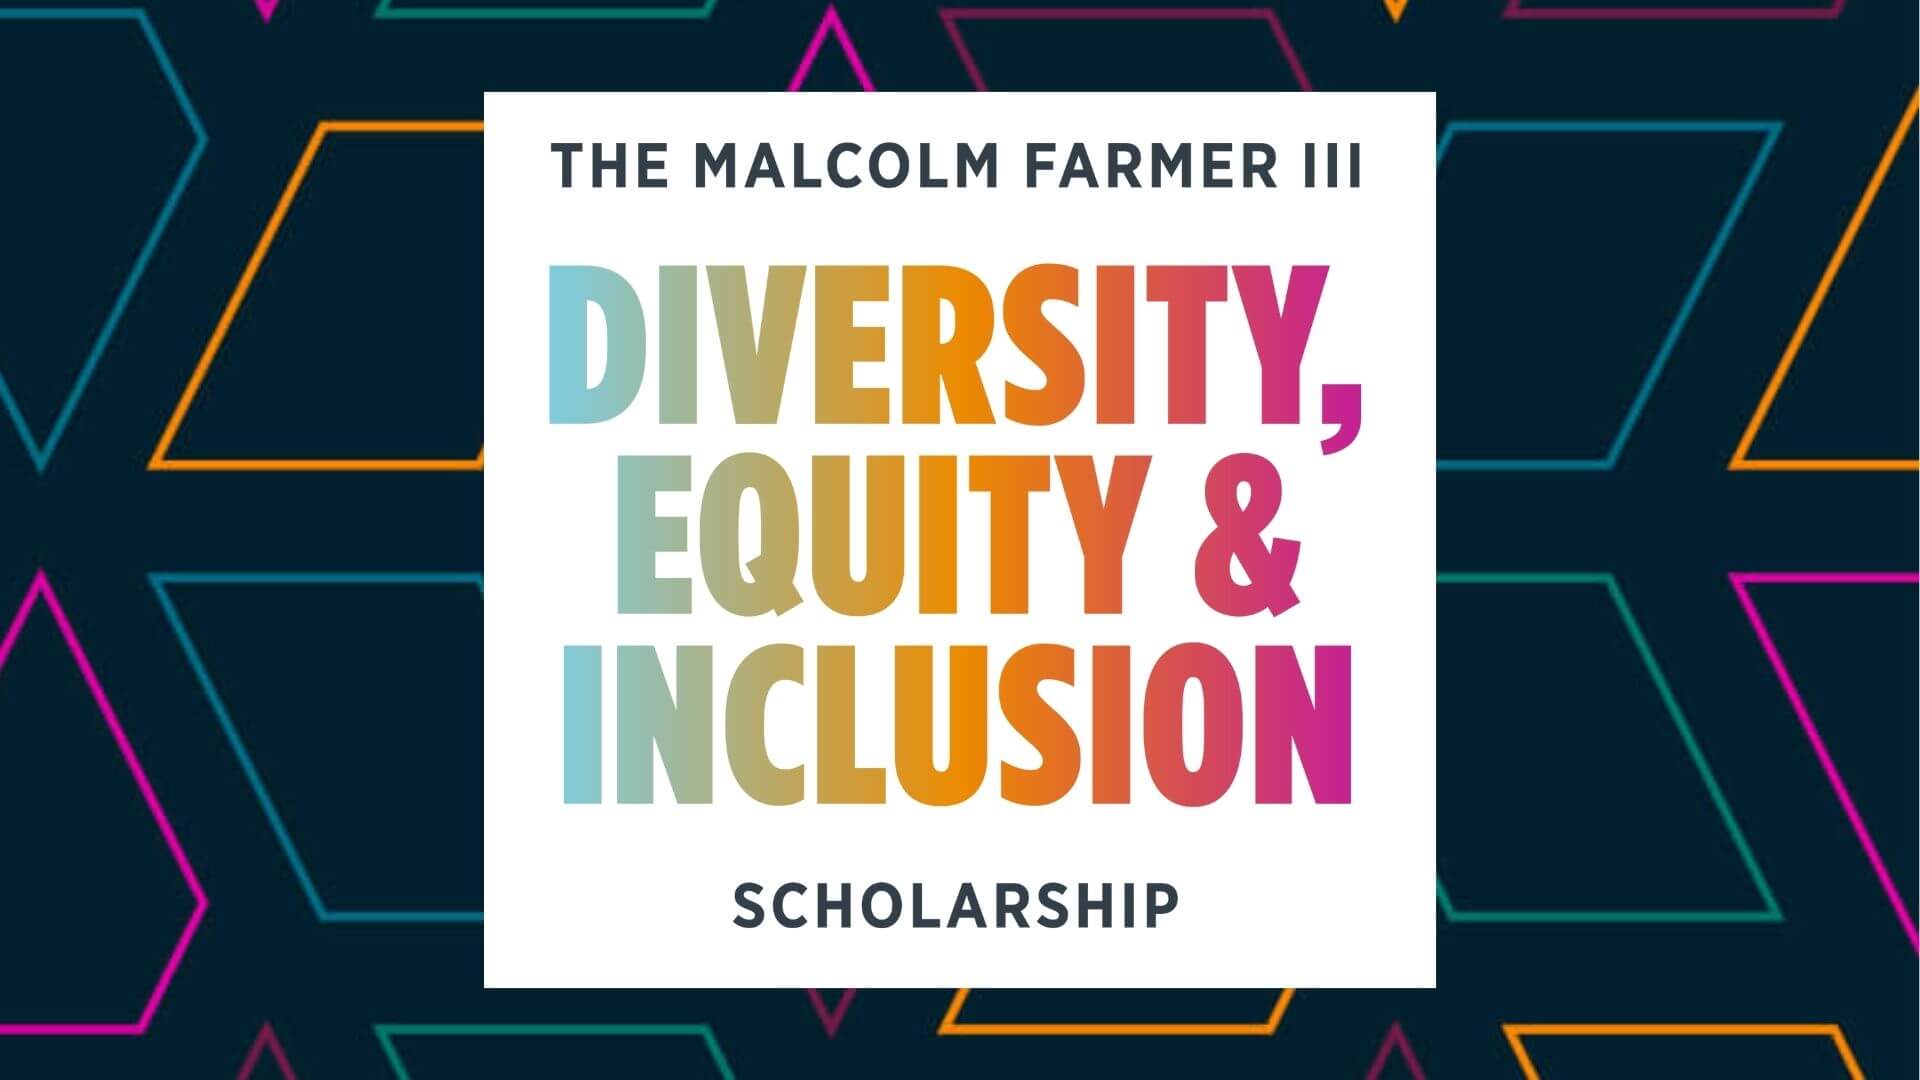 The Malcolm Farmer III Diversity, Equity & Inclusion Scholarship